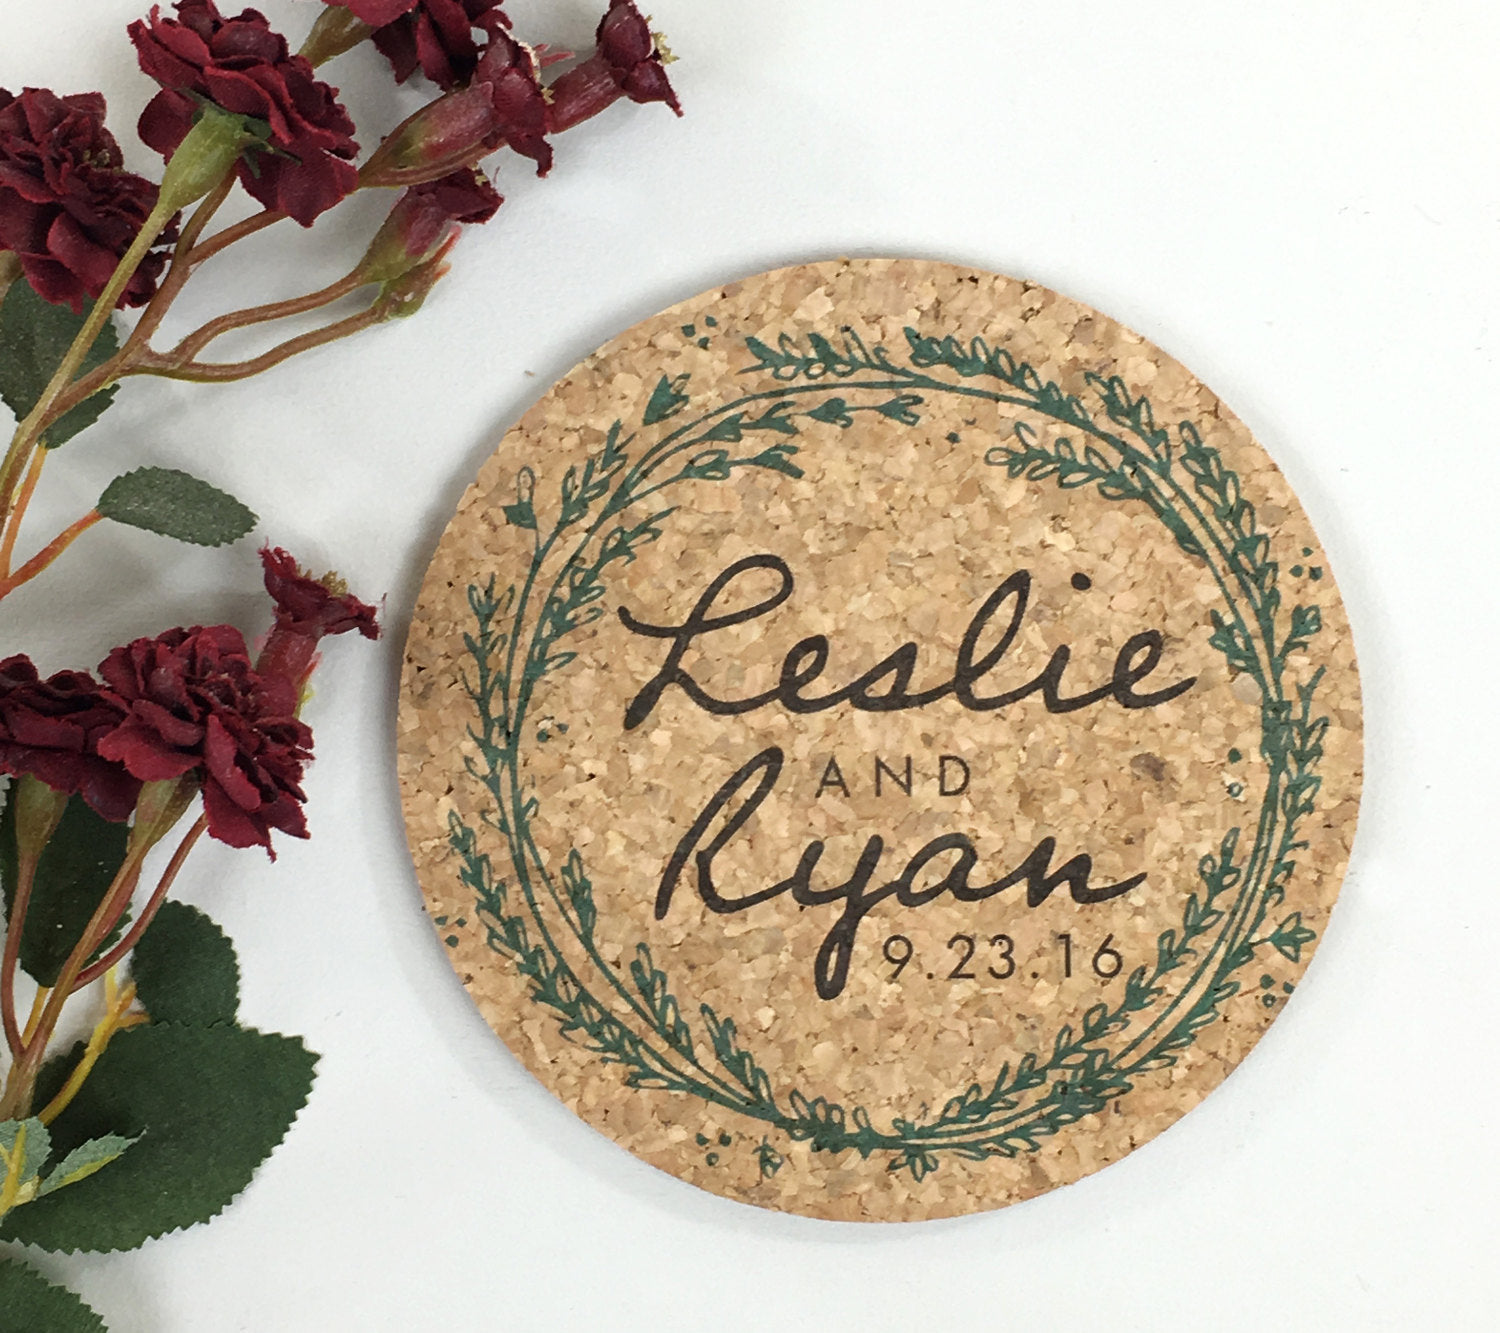 Wreath Cork Coaster Wedding Favor Greenery Personalized with Names and Wedding Date // Wedding Reception Cork Coaster Favor